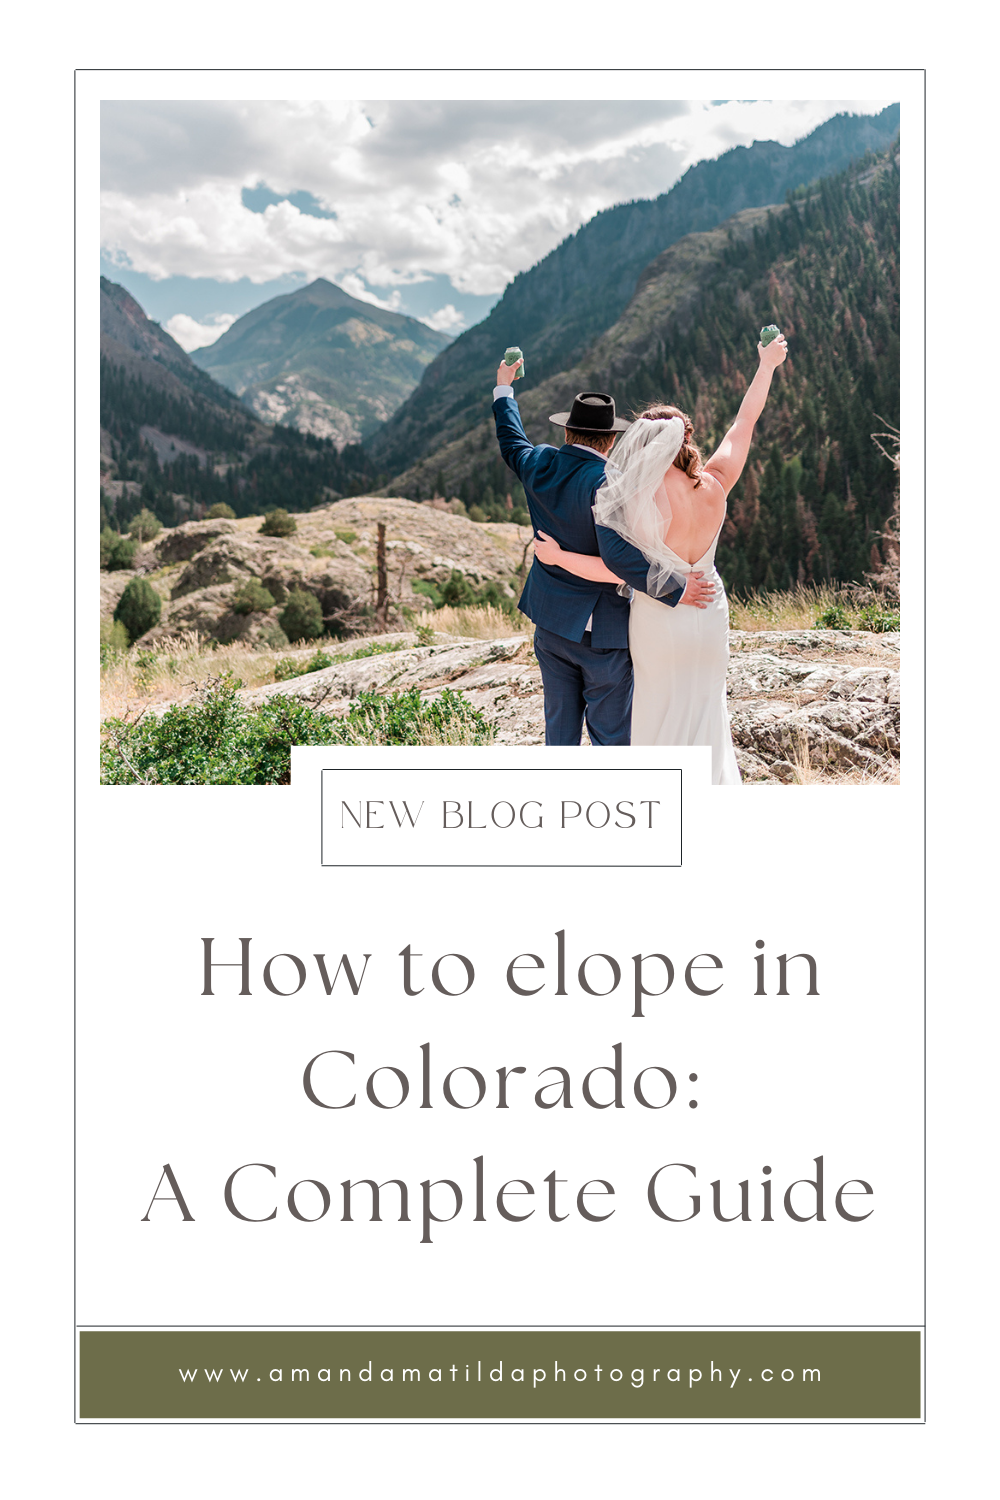 How to elope in Colorado: A Complete Guide